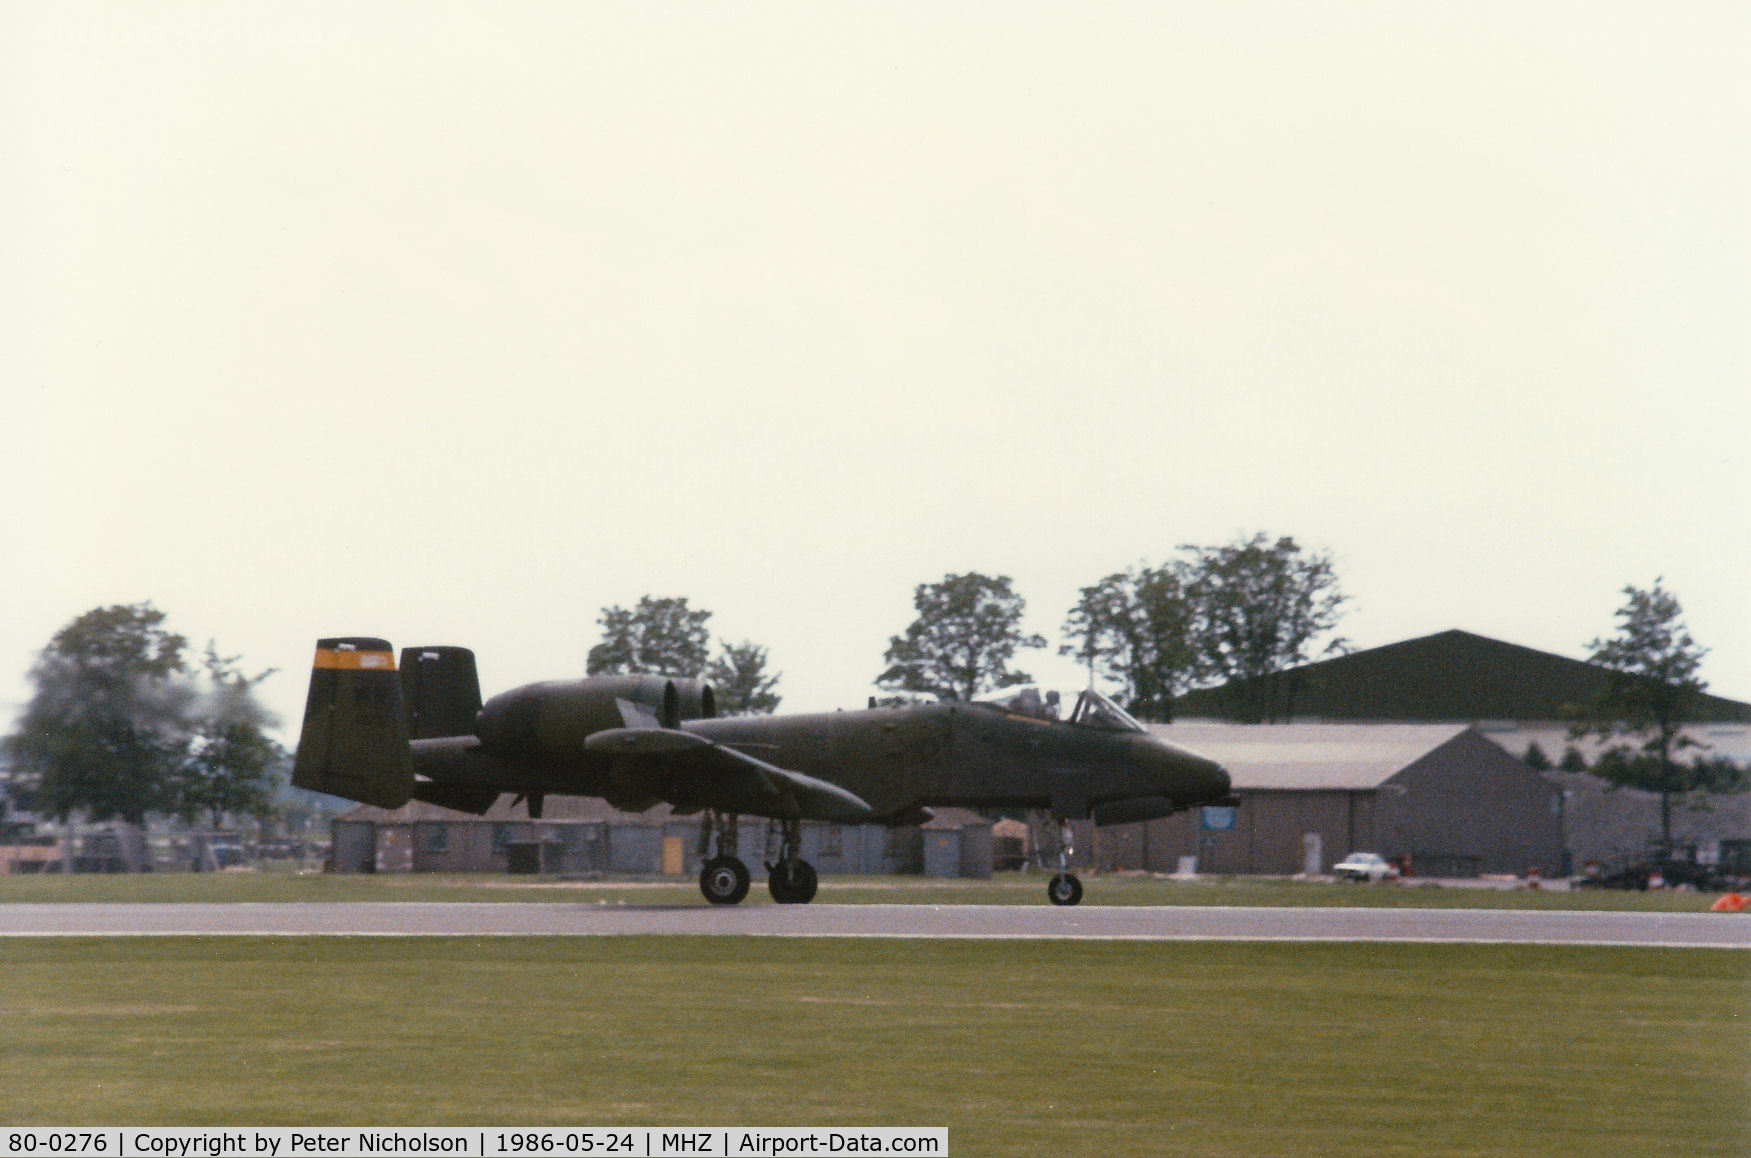 80-0276, 1980 Fairchild Republic A-10A Thunderbolt II C/N A10-0626, A-10A Thunderbolt of  92nd Tactical Fighter Squadron/81st Tactical Fighter Wing taxying after display at the 1986 RAF Mildenhall Air Fete.